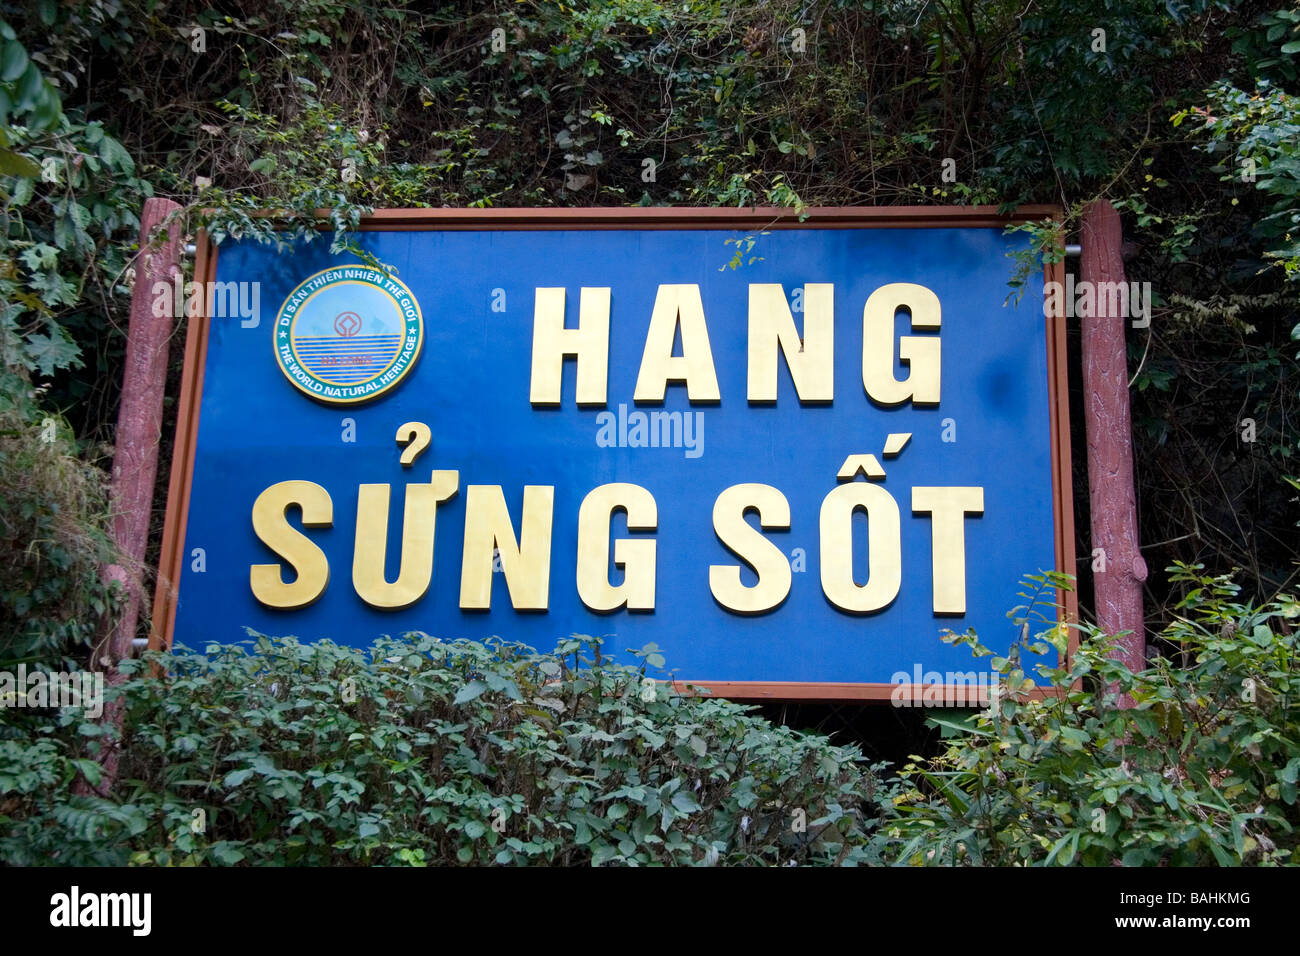 Entrance to the Hang Sung Sot caves in Ha Long Bay Vietnam Stock Photo